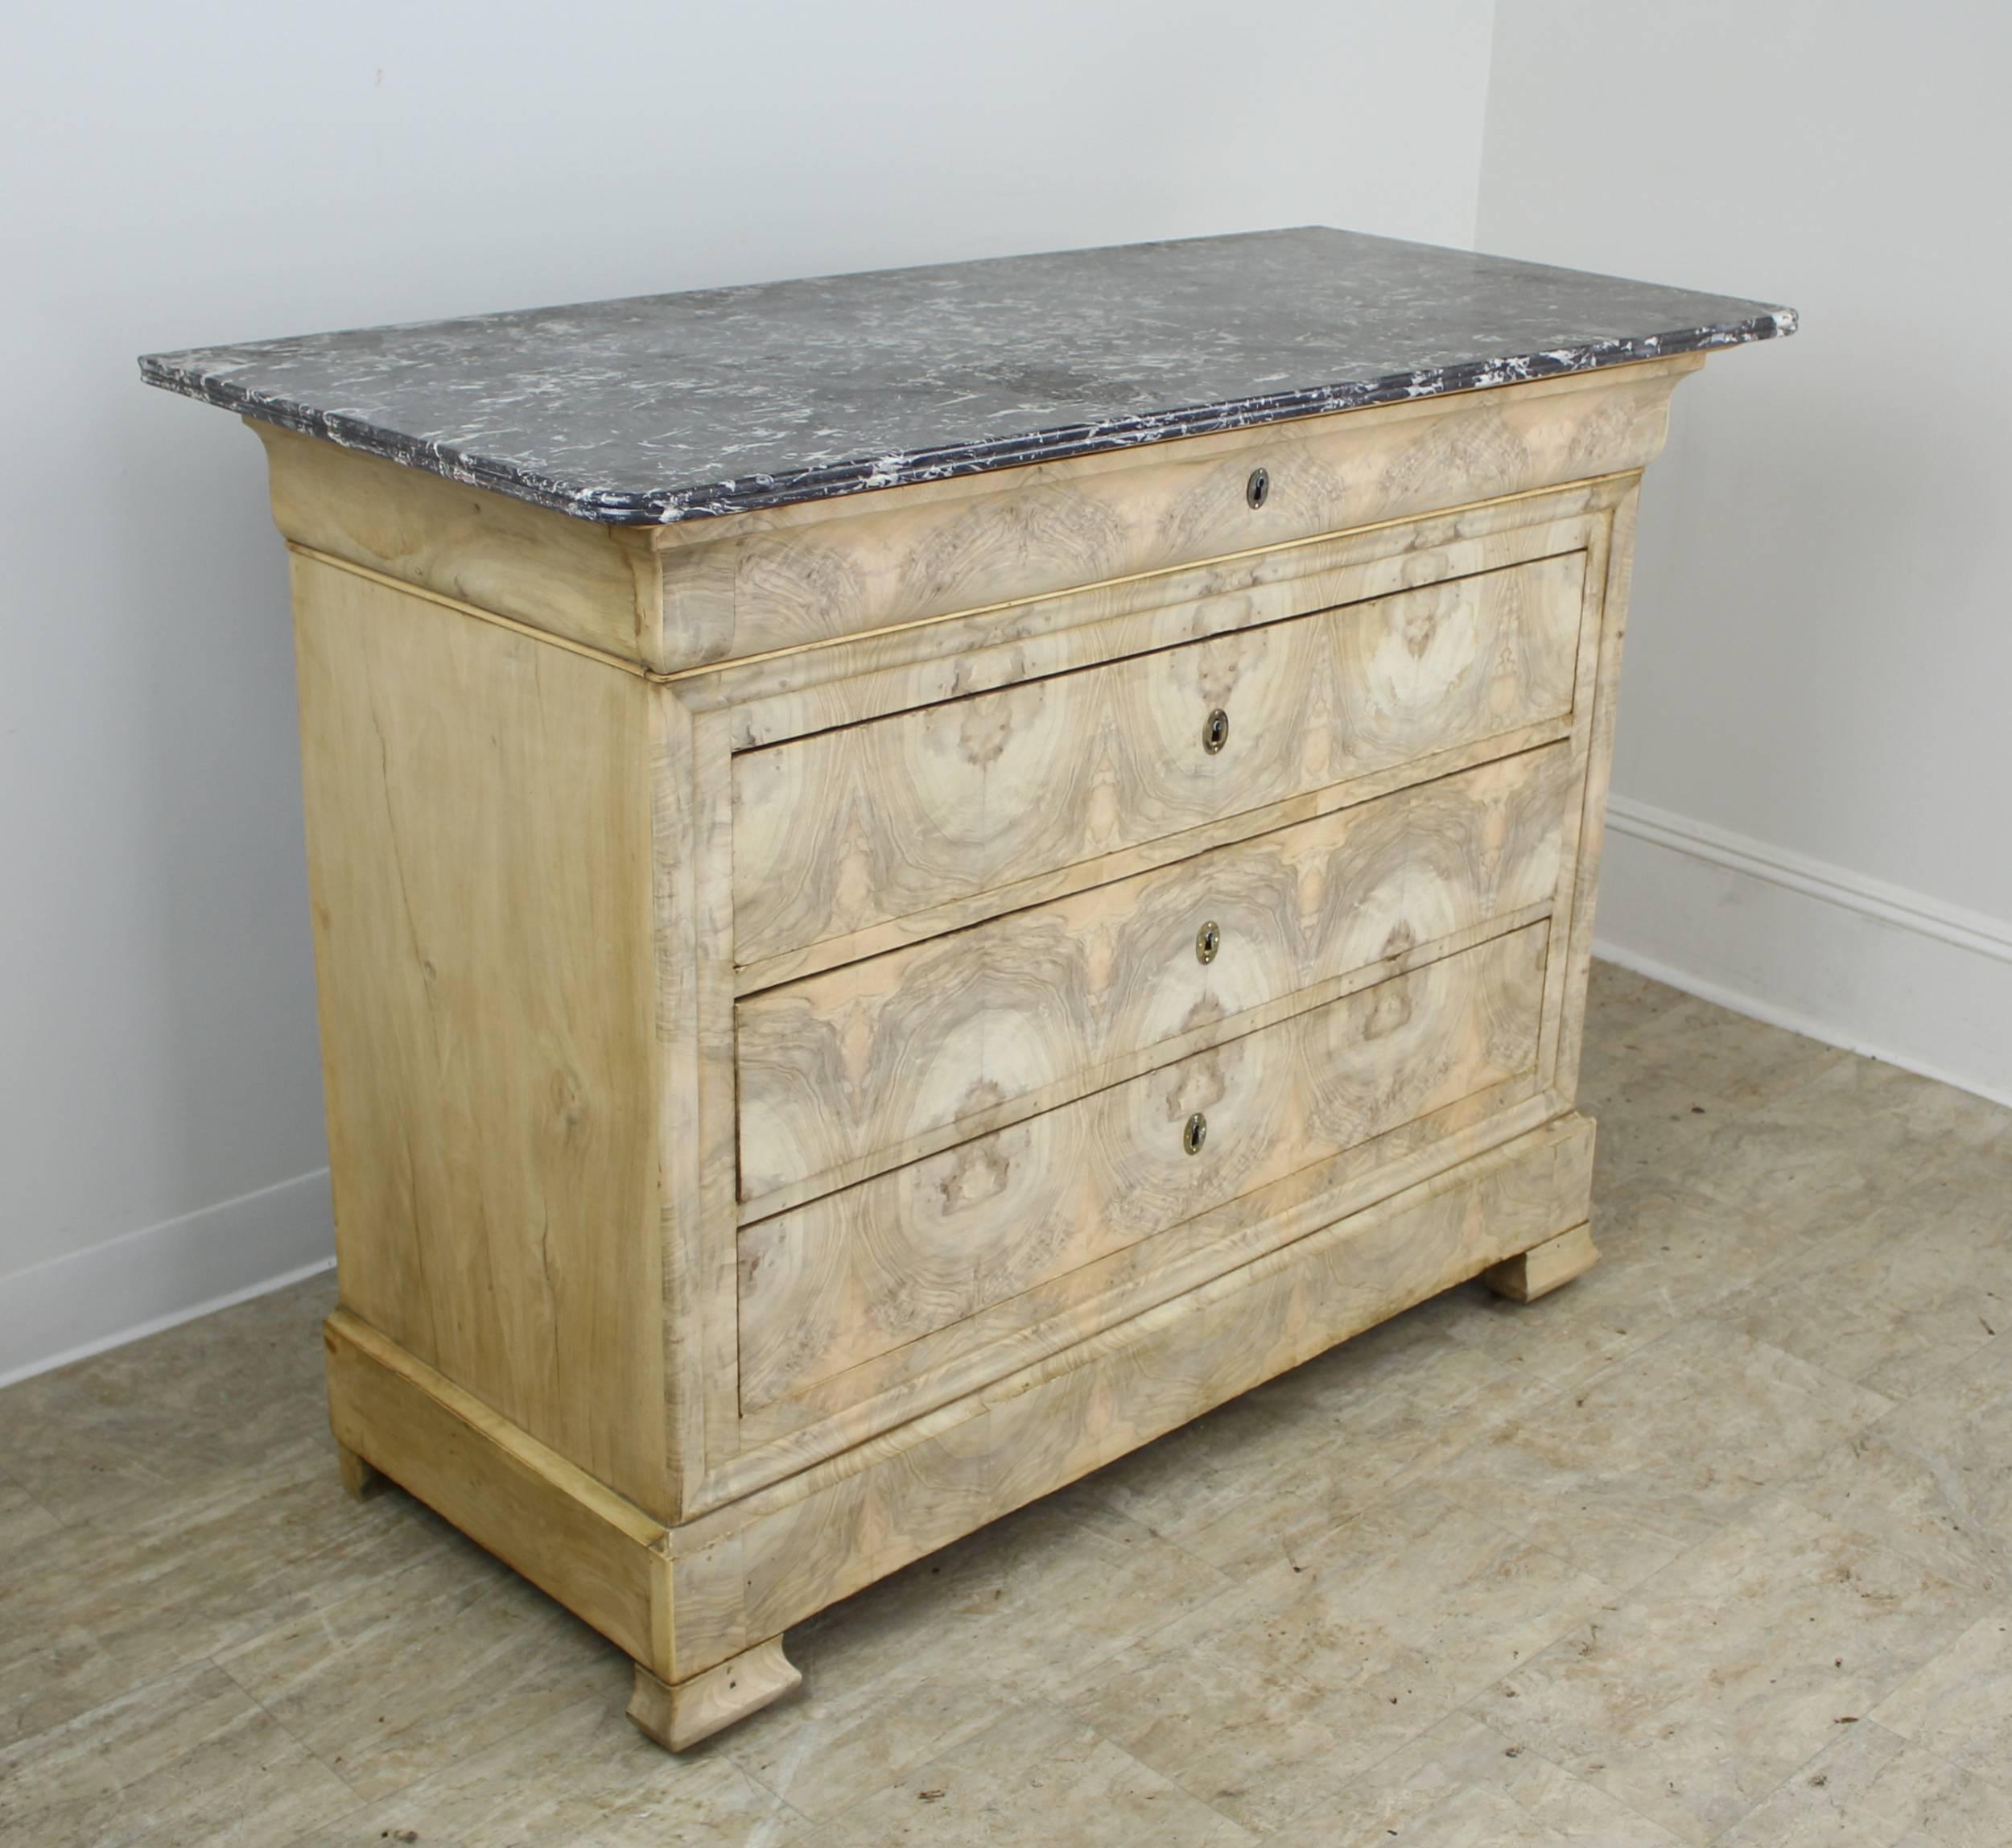 Bleached walnut burl veneer is a popular trend on the rise in French and English decorating. We are starting to see a similar bureau in fine decorative shops on our buying trips. The walnut veneer has dramatic grain which bleaches to a muted